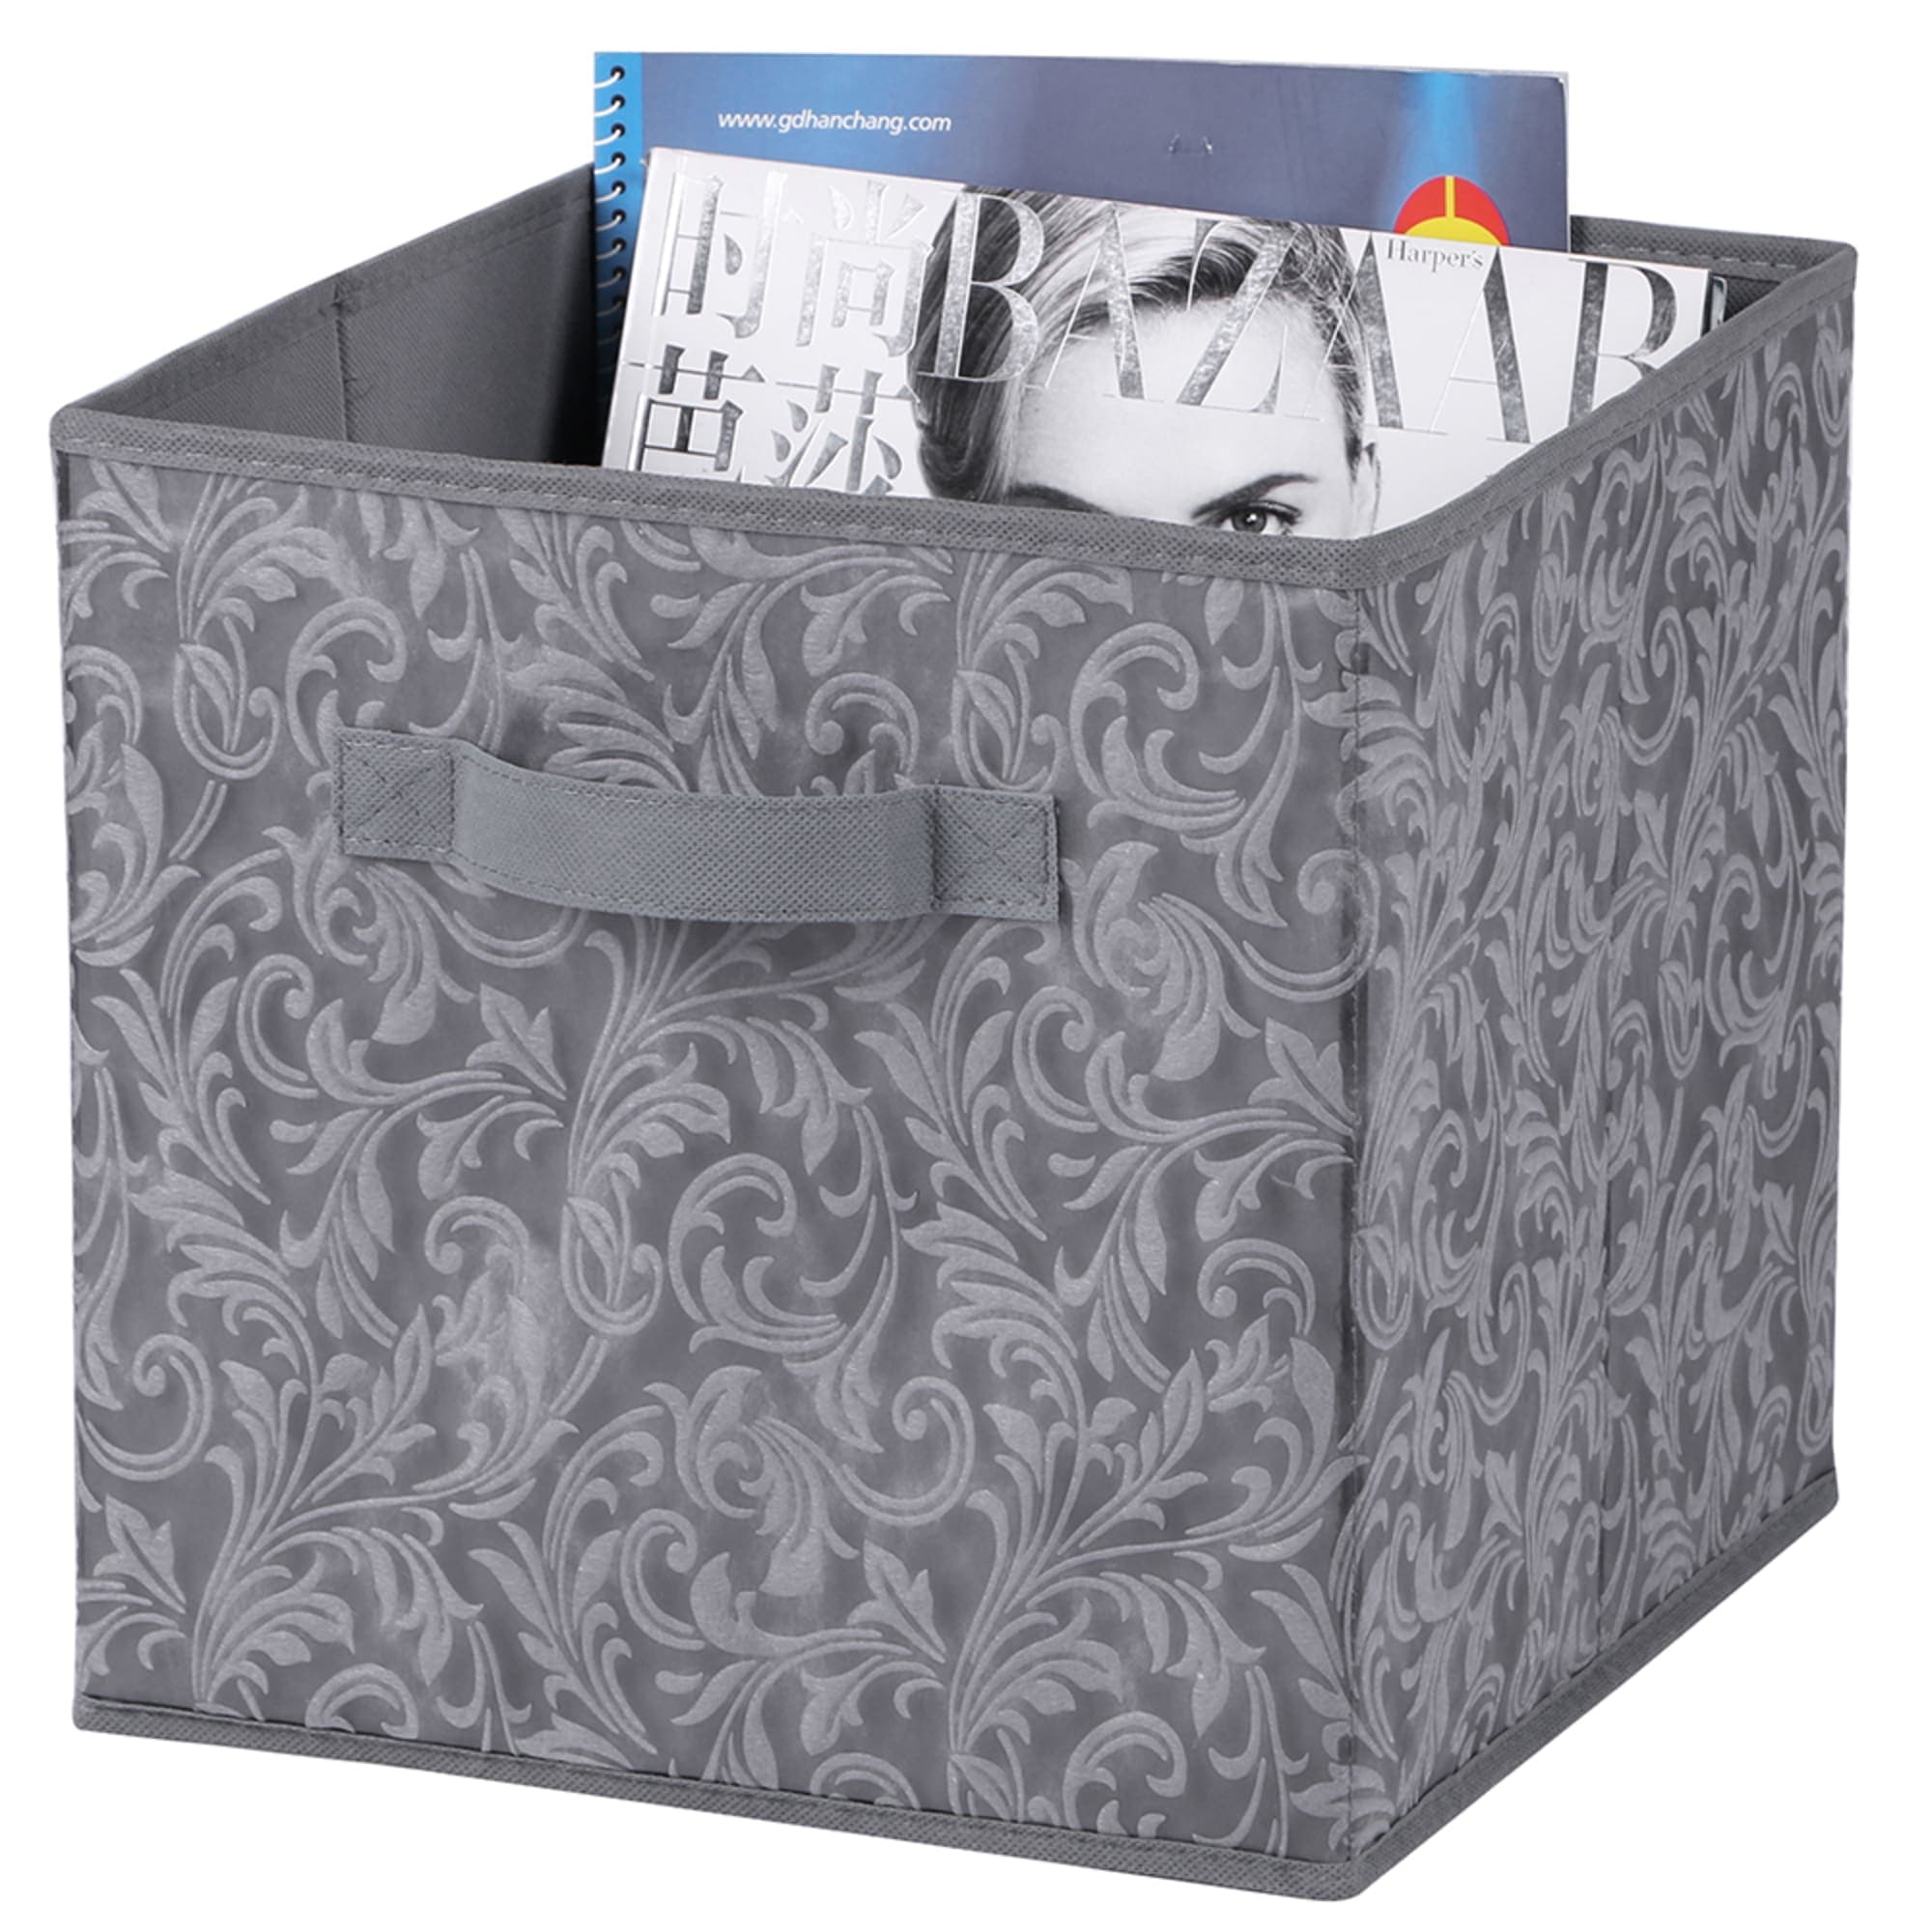 Home Basics Damask Collection Non-Woven Storage Box, Grey $3.00 EACH, CASE PACK OF 12